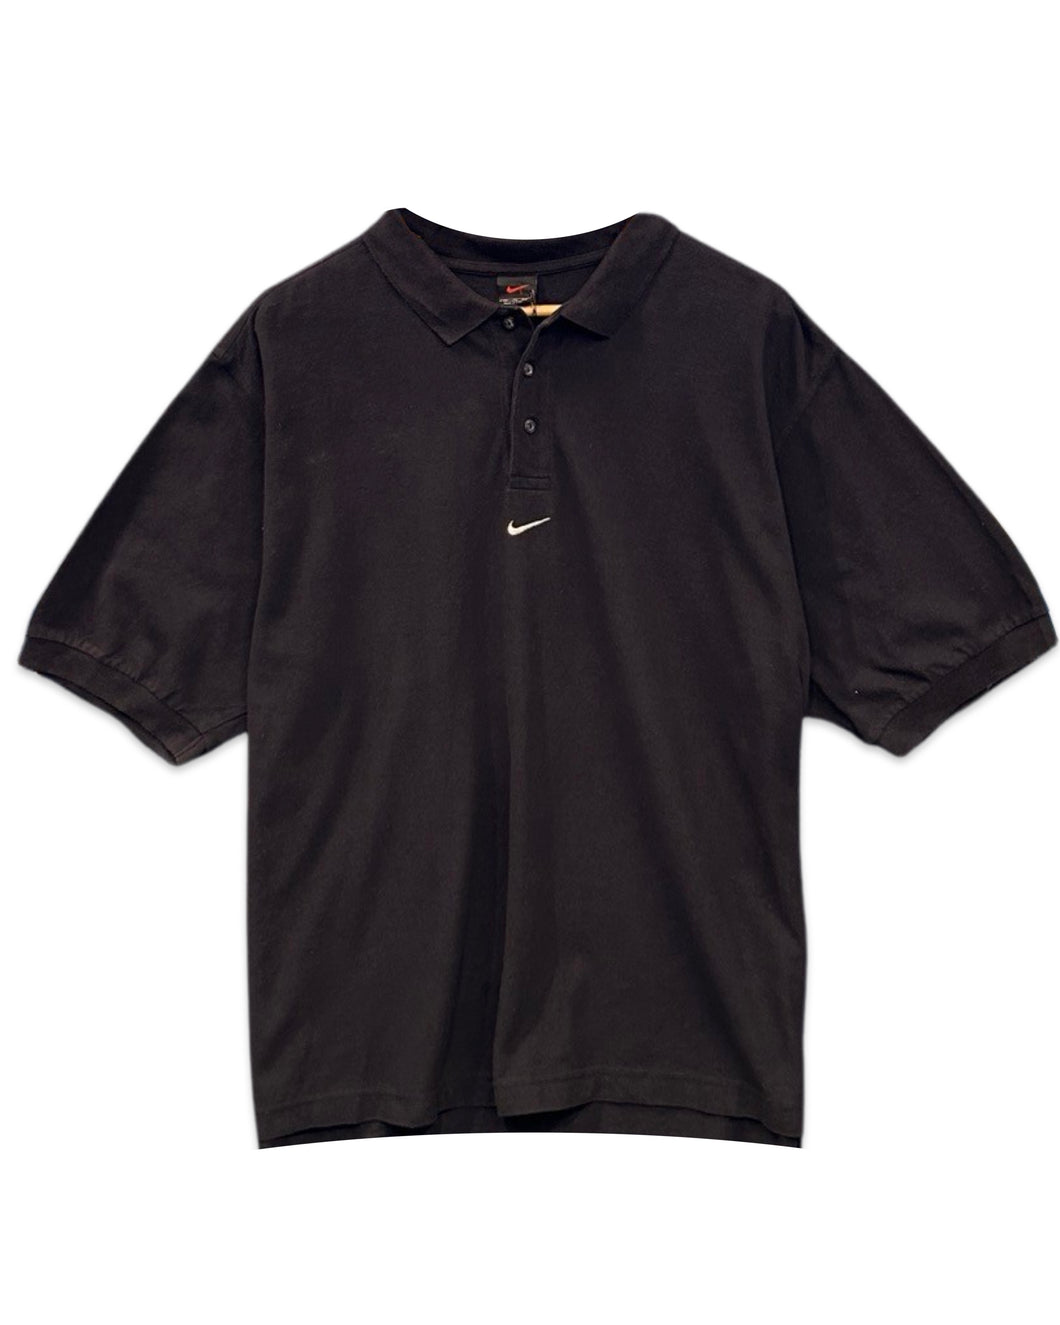 Nike Vintage Centre Swoosh Short Sleeve Polo in Black ⏐ Fits XL/2XL